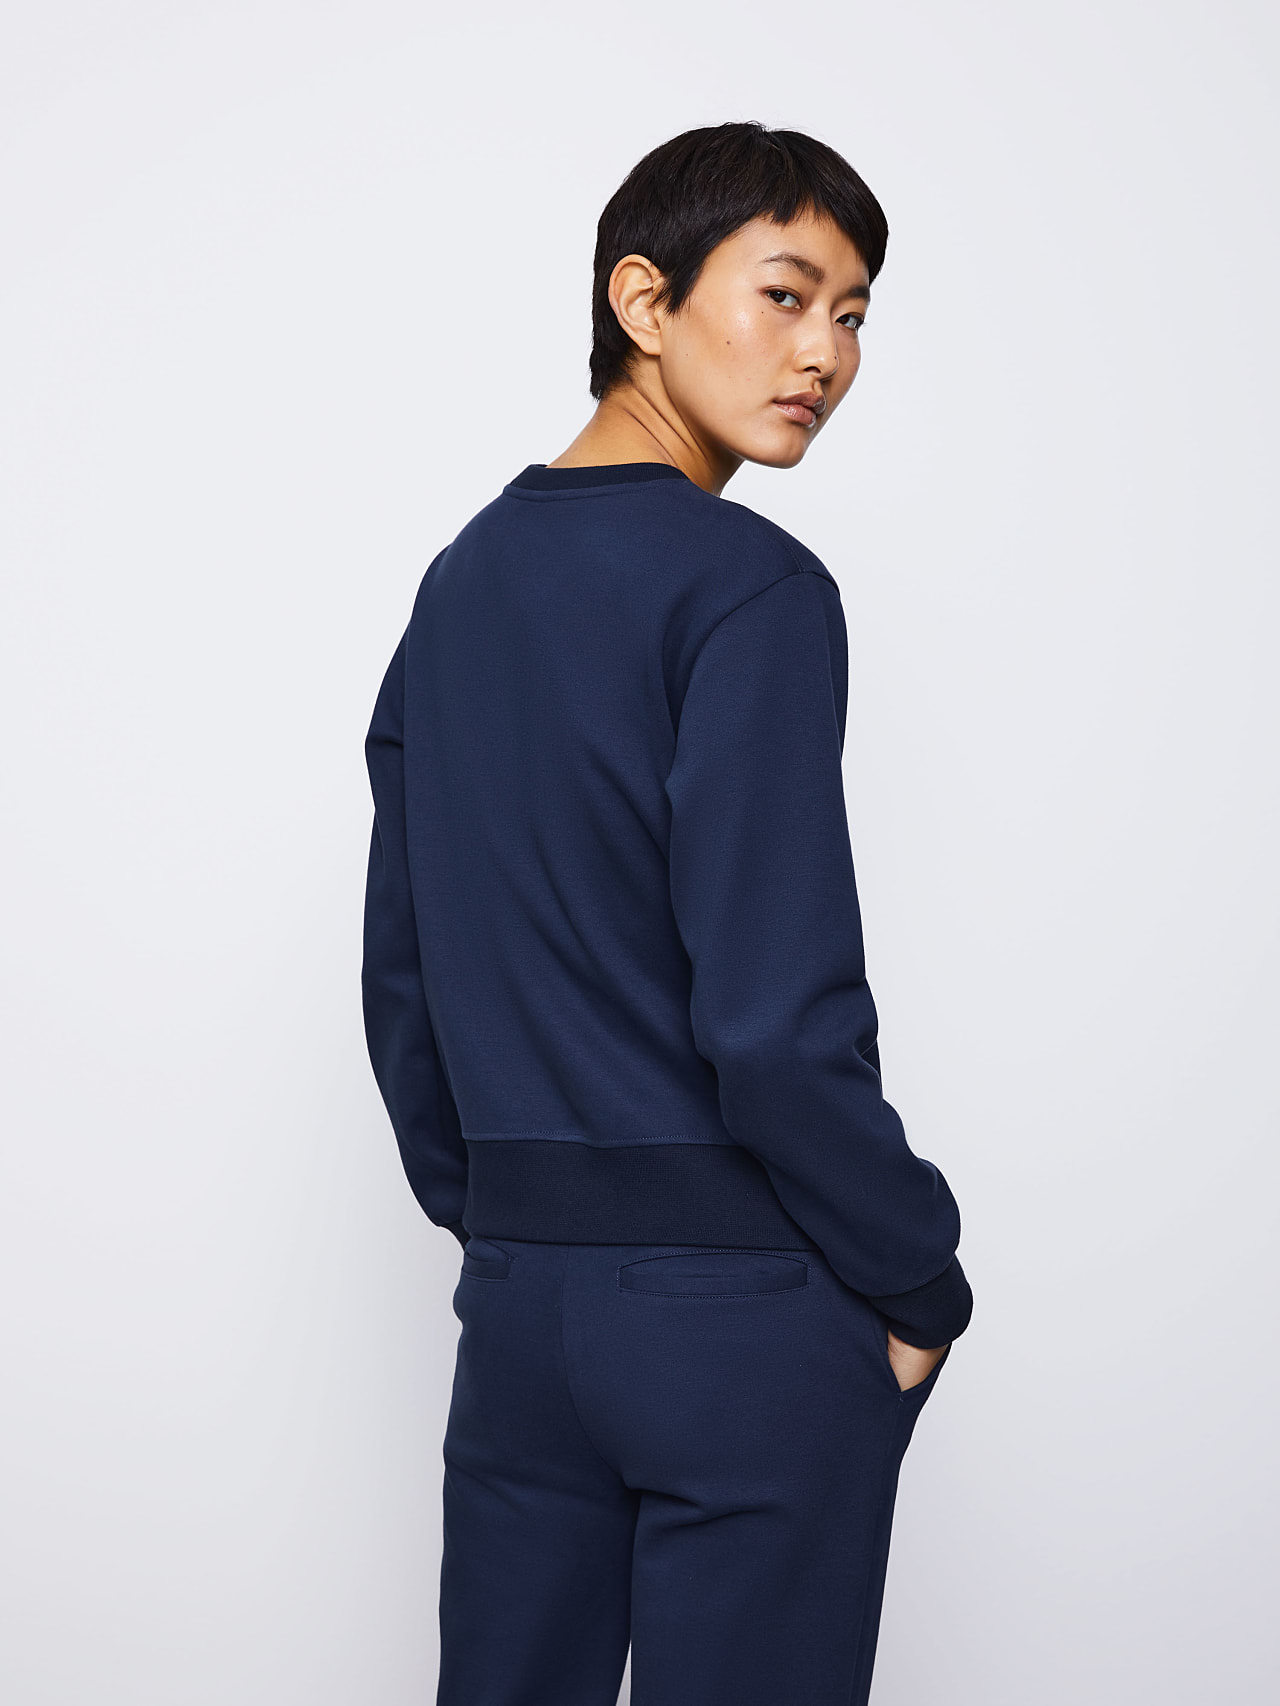 AlphaTauri | STEMB V1.Y6.01 | Sweater with Logo Embroidery in navy for Women